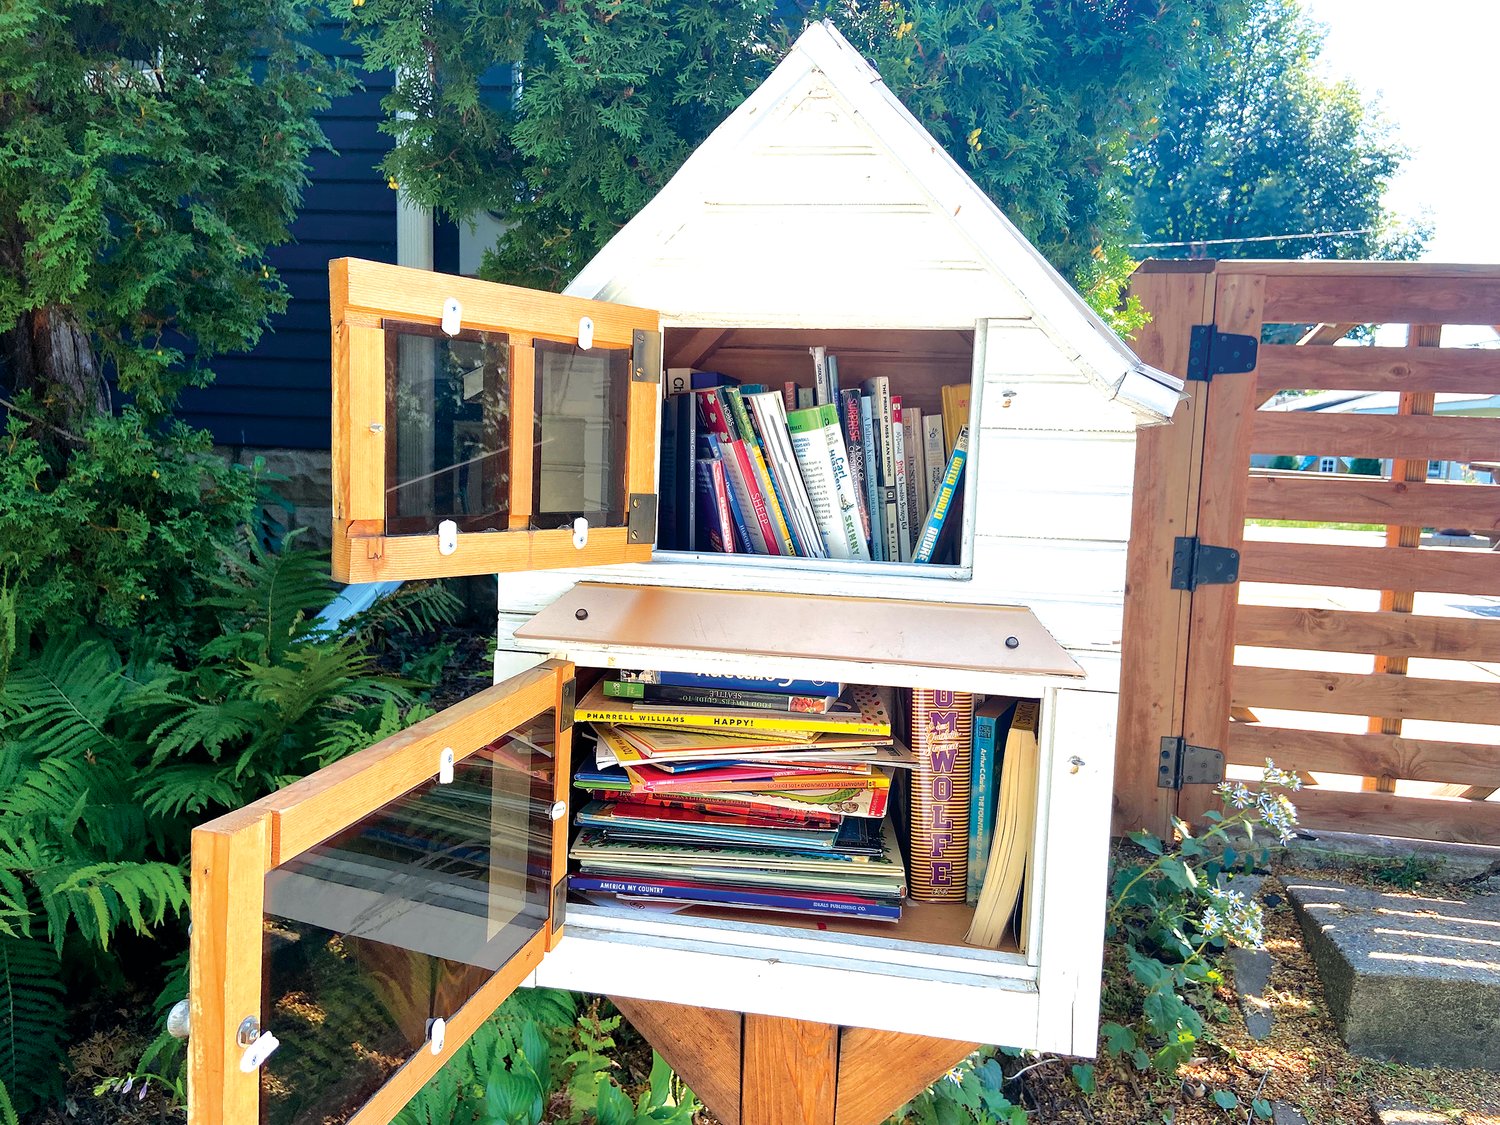 Each Little Free Library is uniquely designed and painted. But the premise behind all is the same: take a book, leave a book.